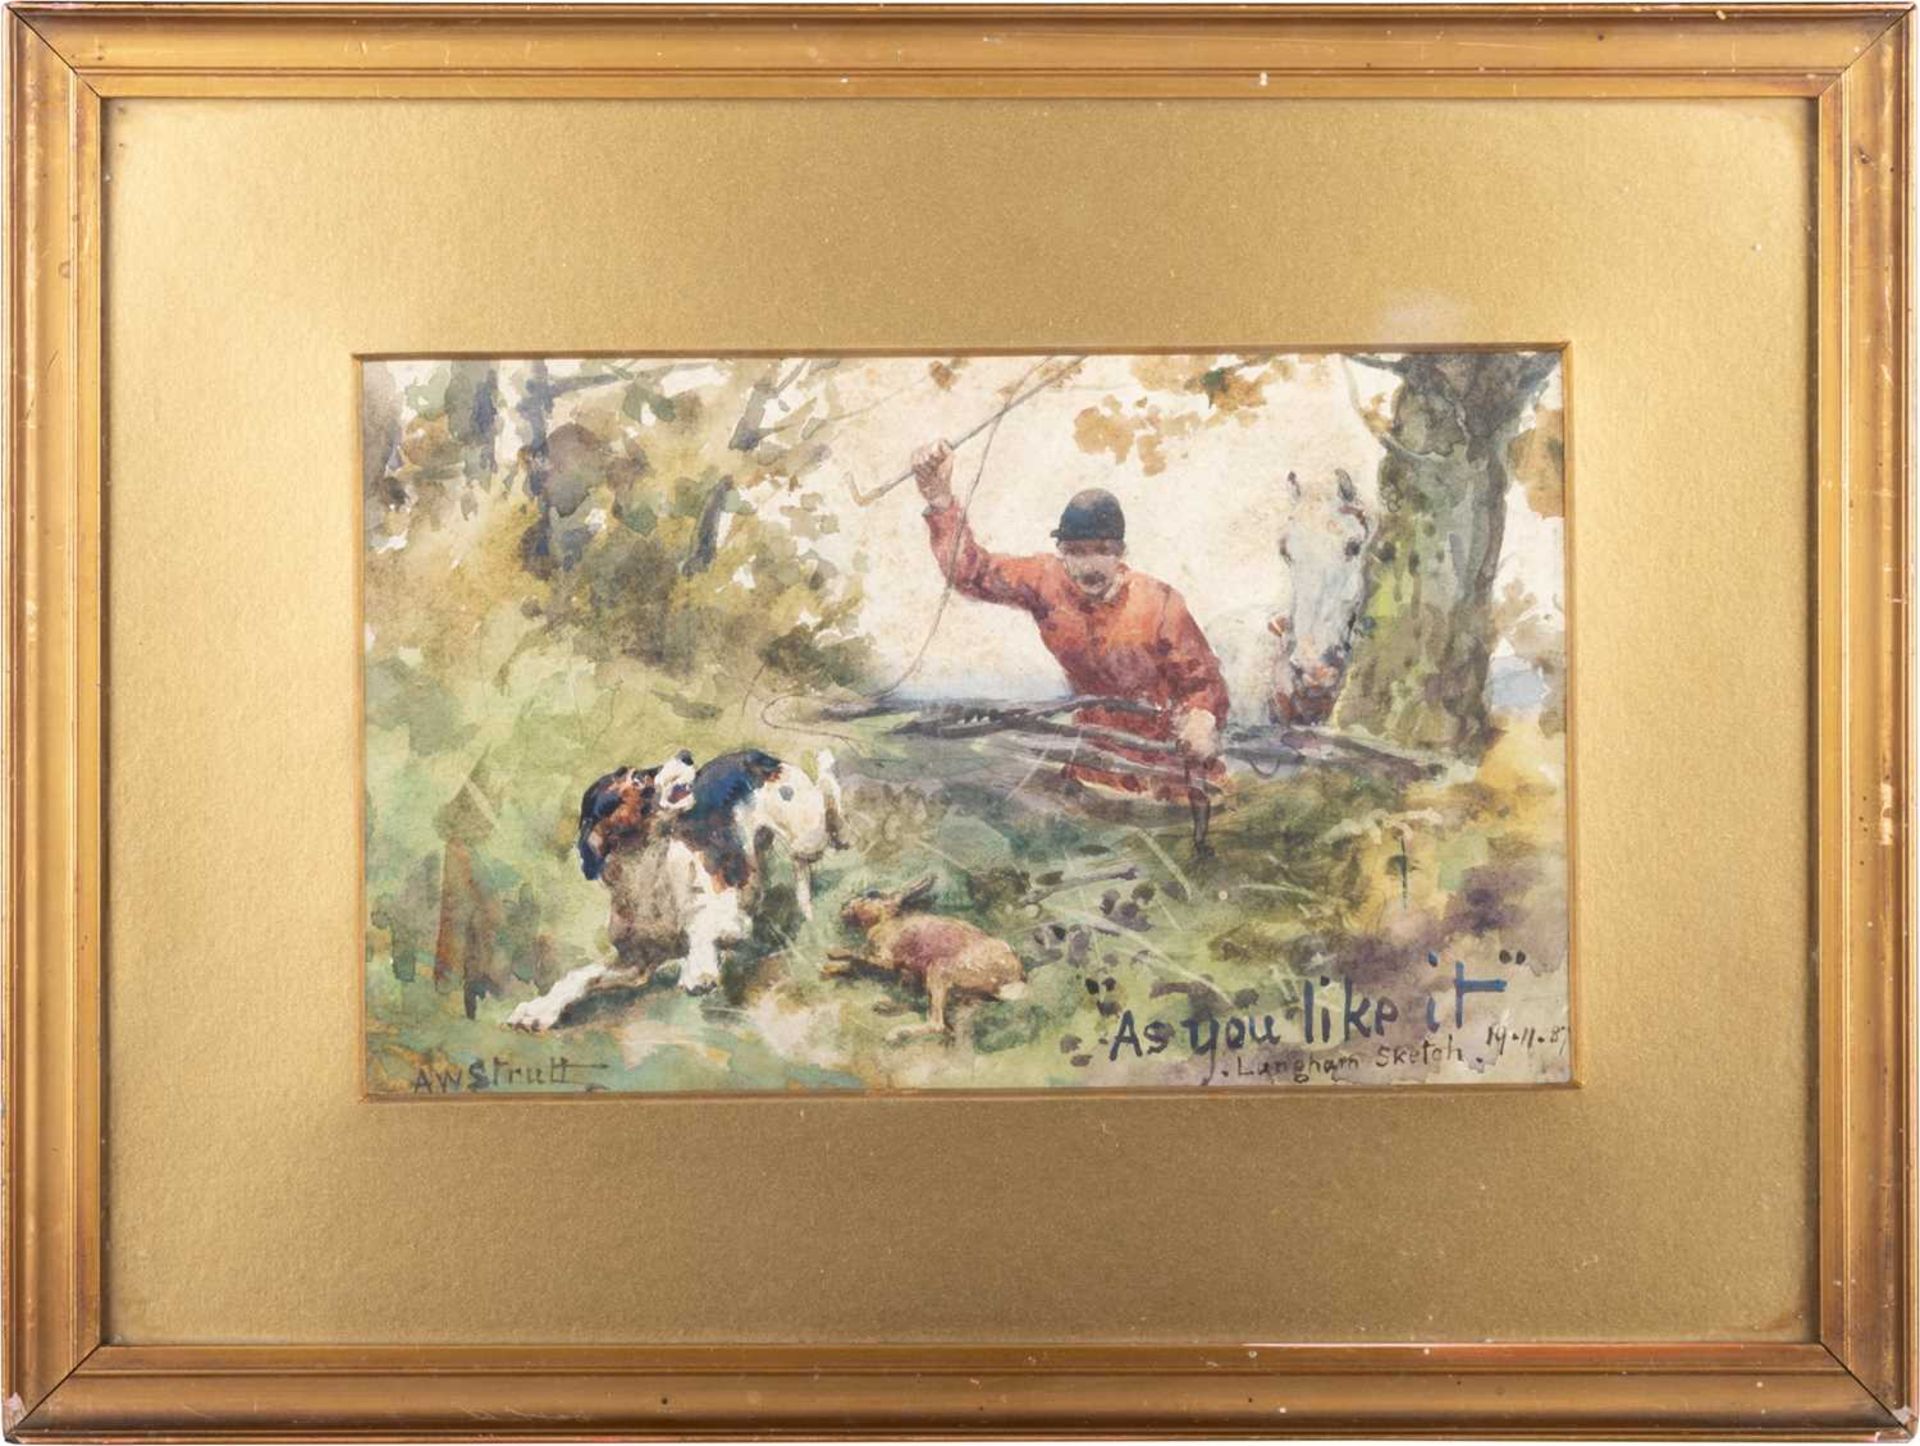 ALFRED WILLIAM STRUTT (1856-1924) AS YOU LIKE IT, HUNTING SCENE - Image 2 of 3